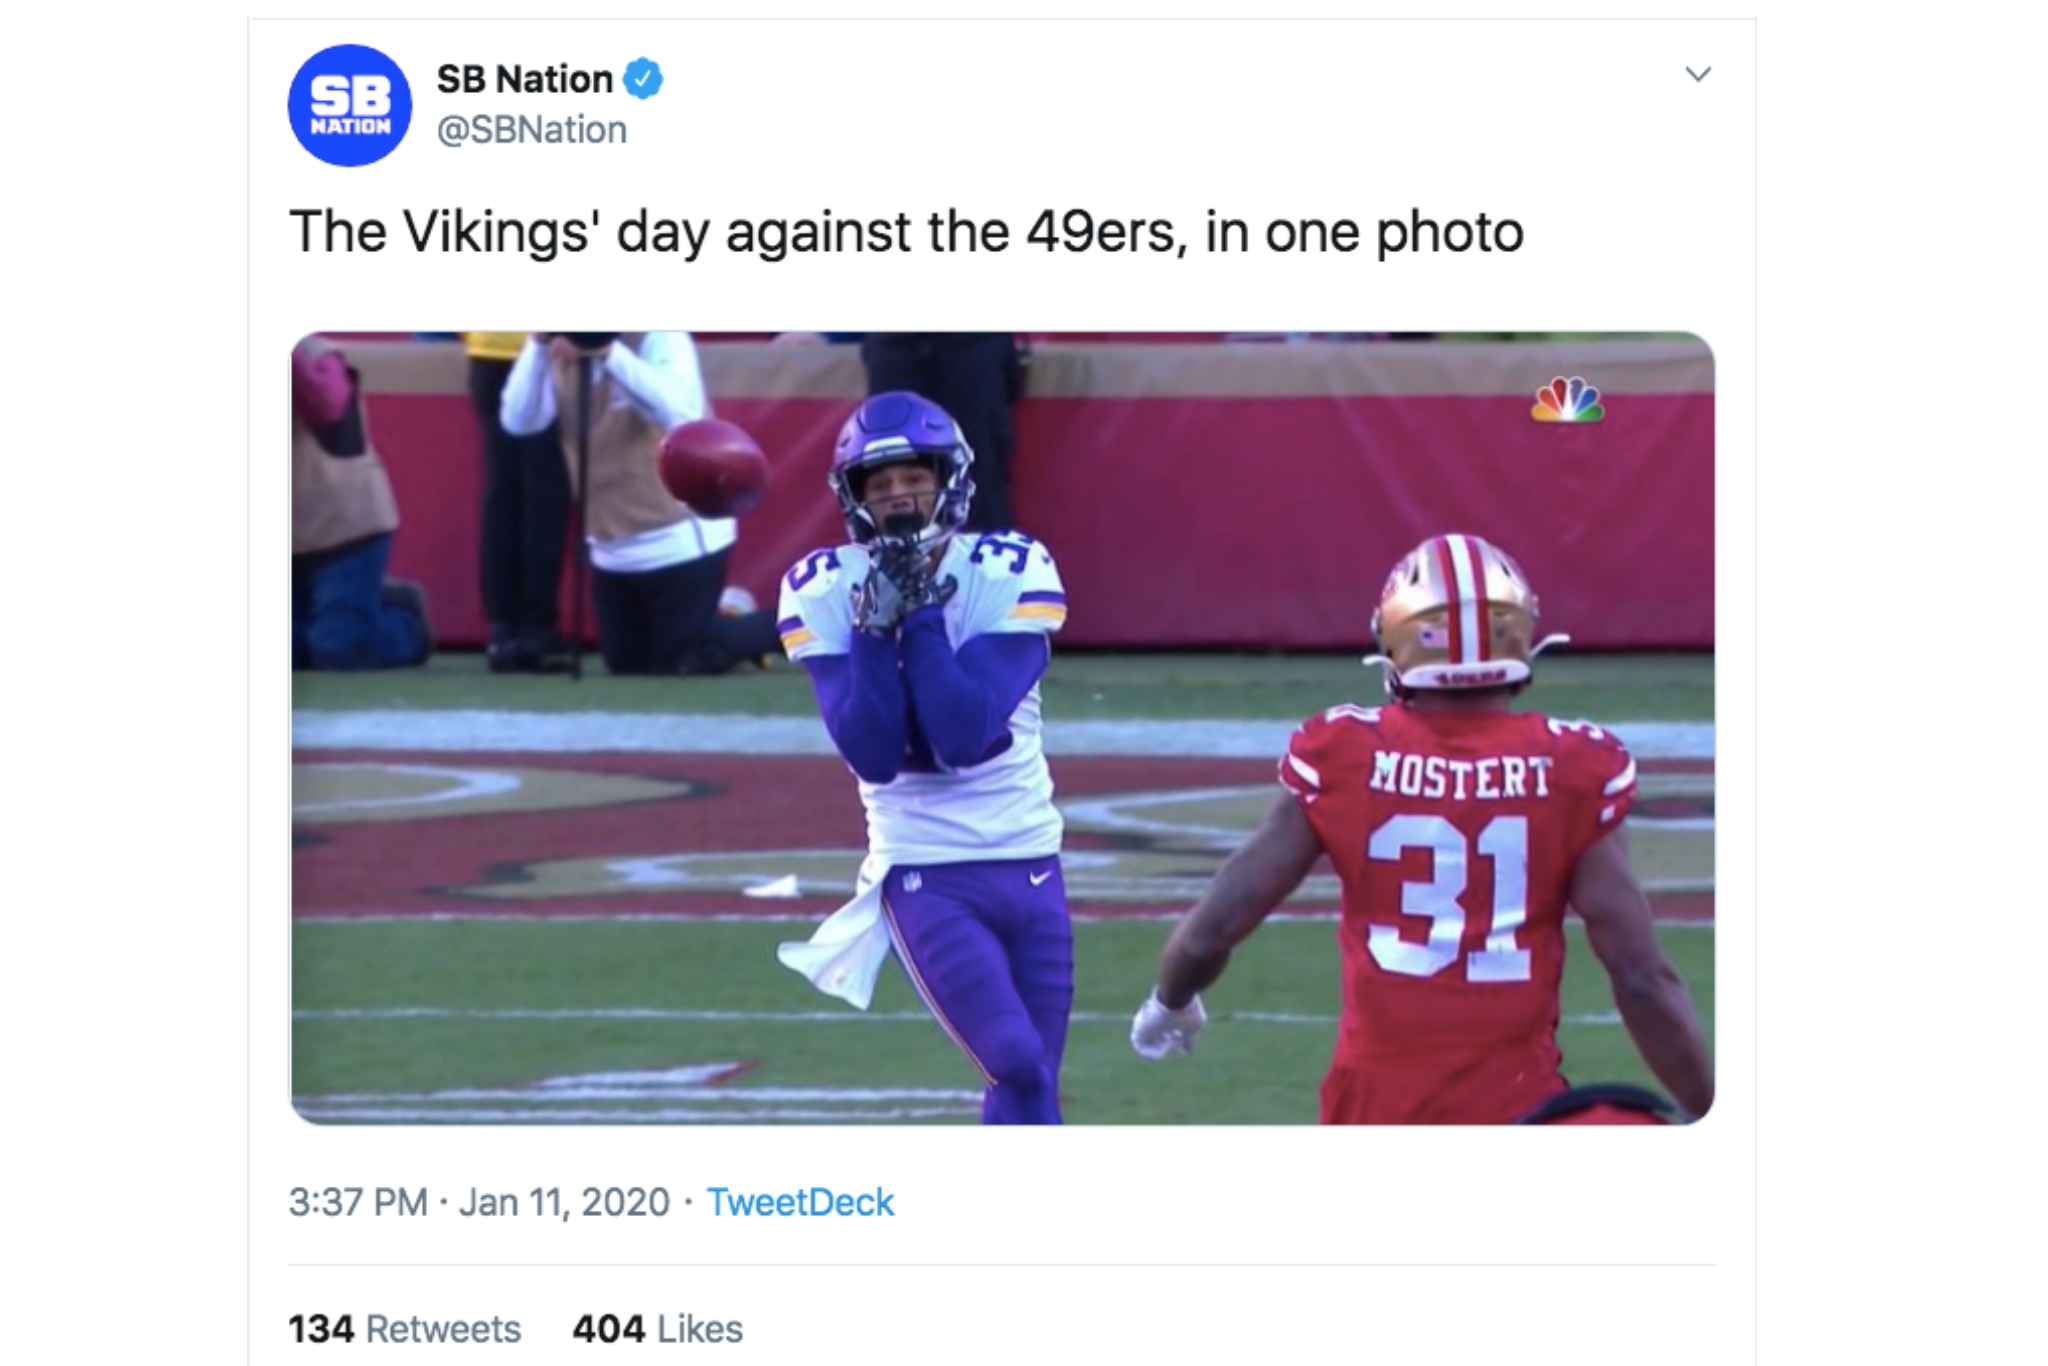 49ers' dominant win over Vikings gets meme'd by NFL fans.